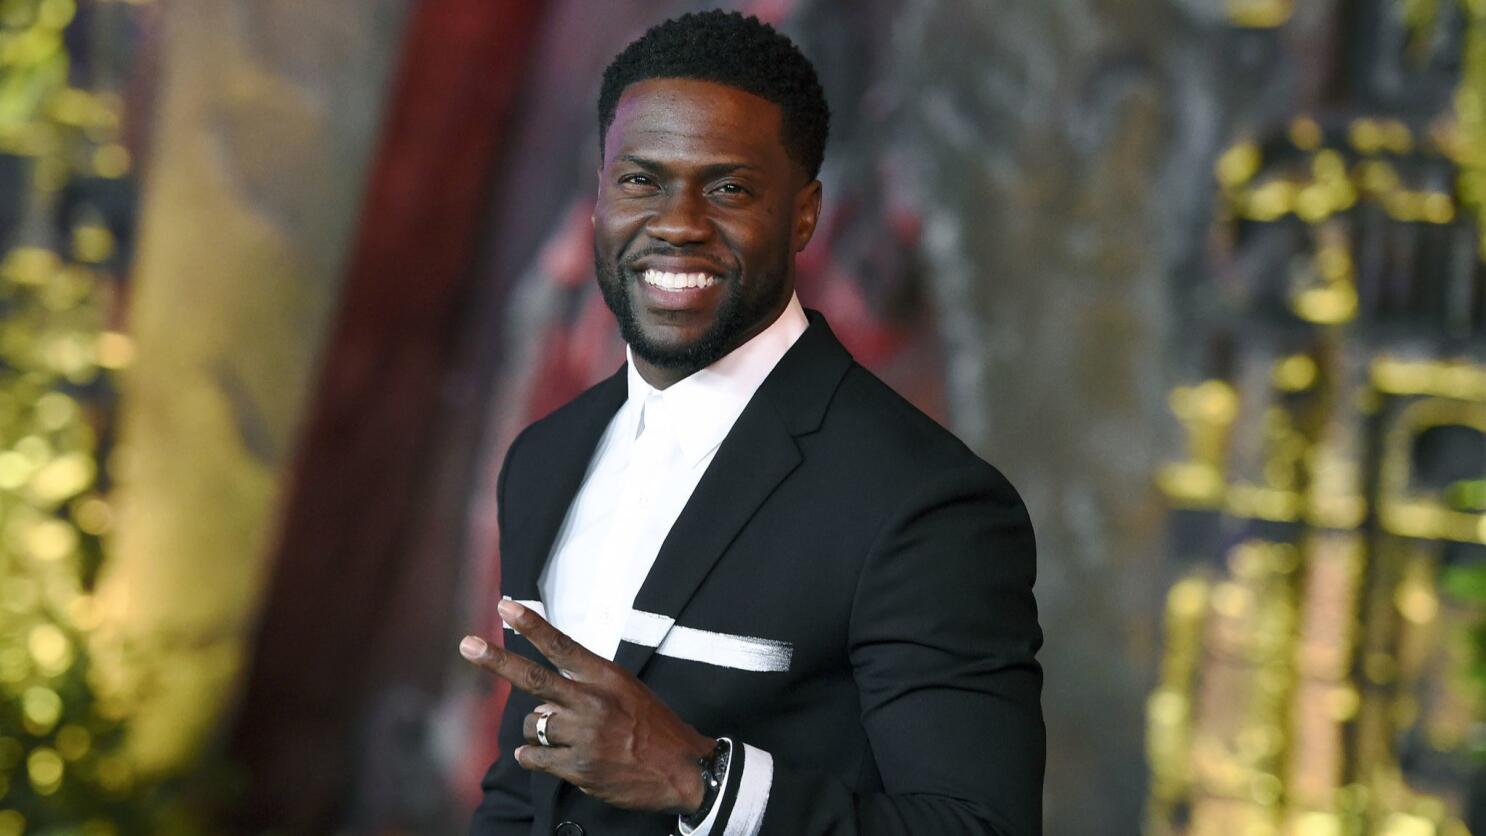 Kevin Hart Reveals Why He’ll Never Host the Oscars Again